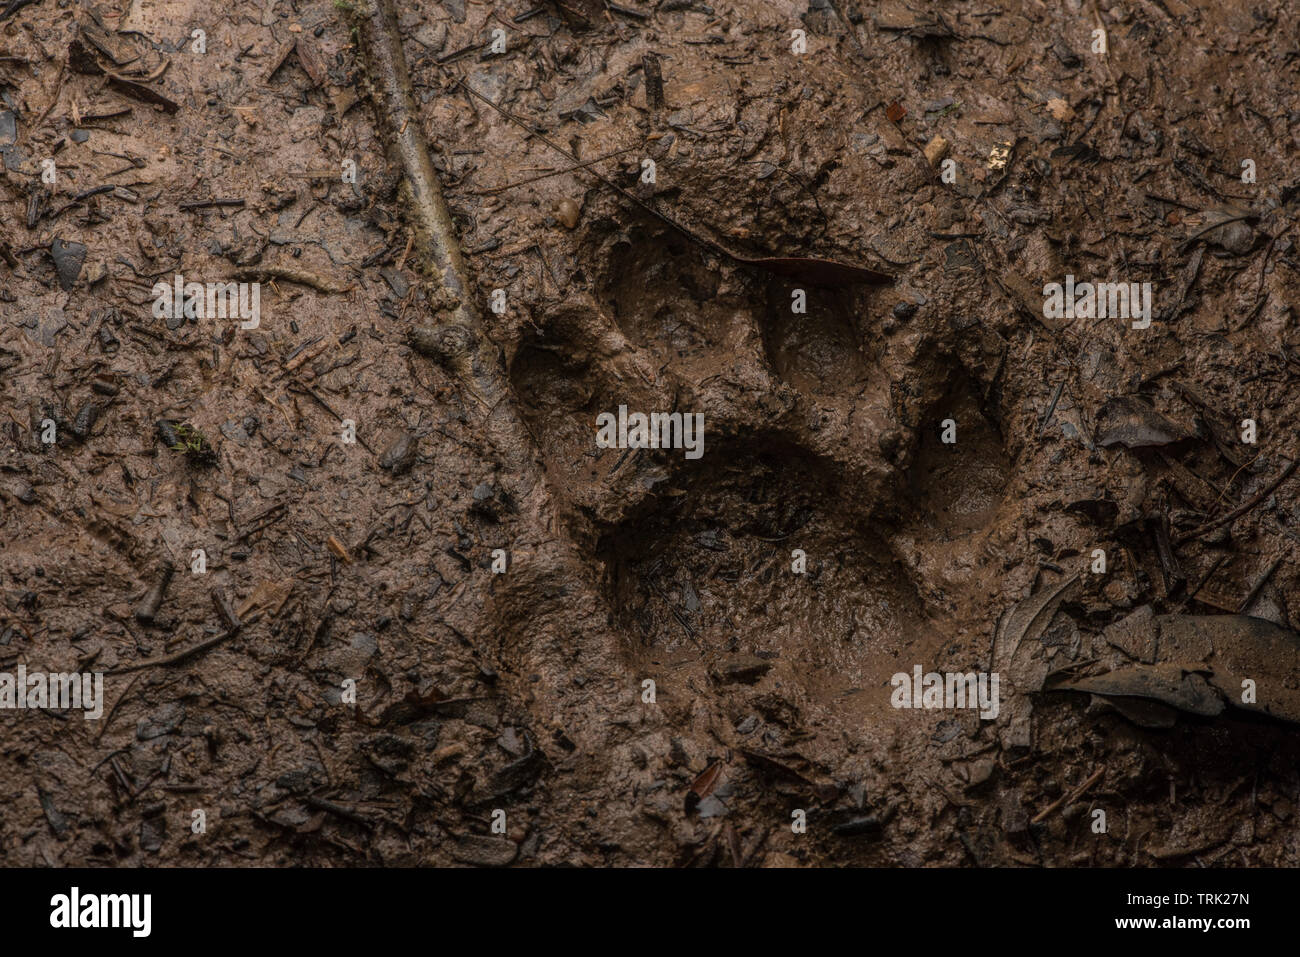 A footprint from a wild ocelot in Yasuni national park in the Amazon jungle of Ecuador. Stock Photo